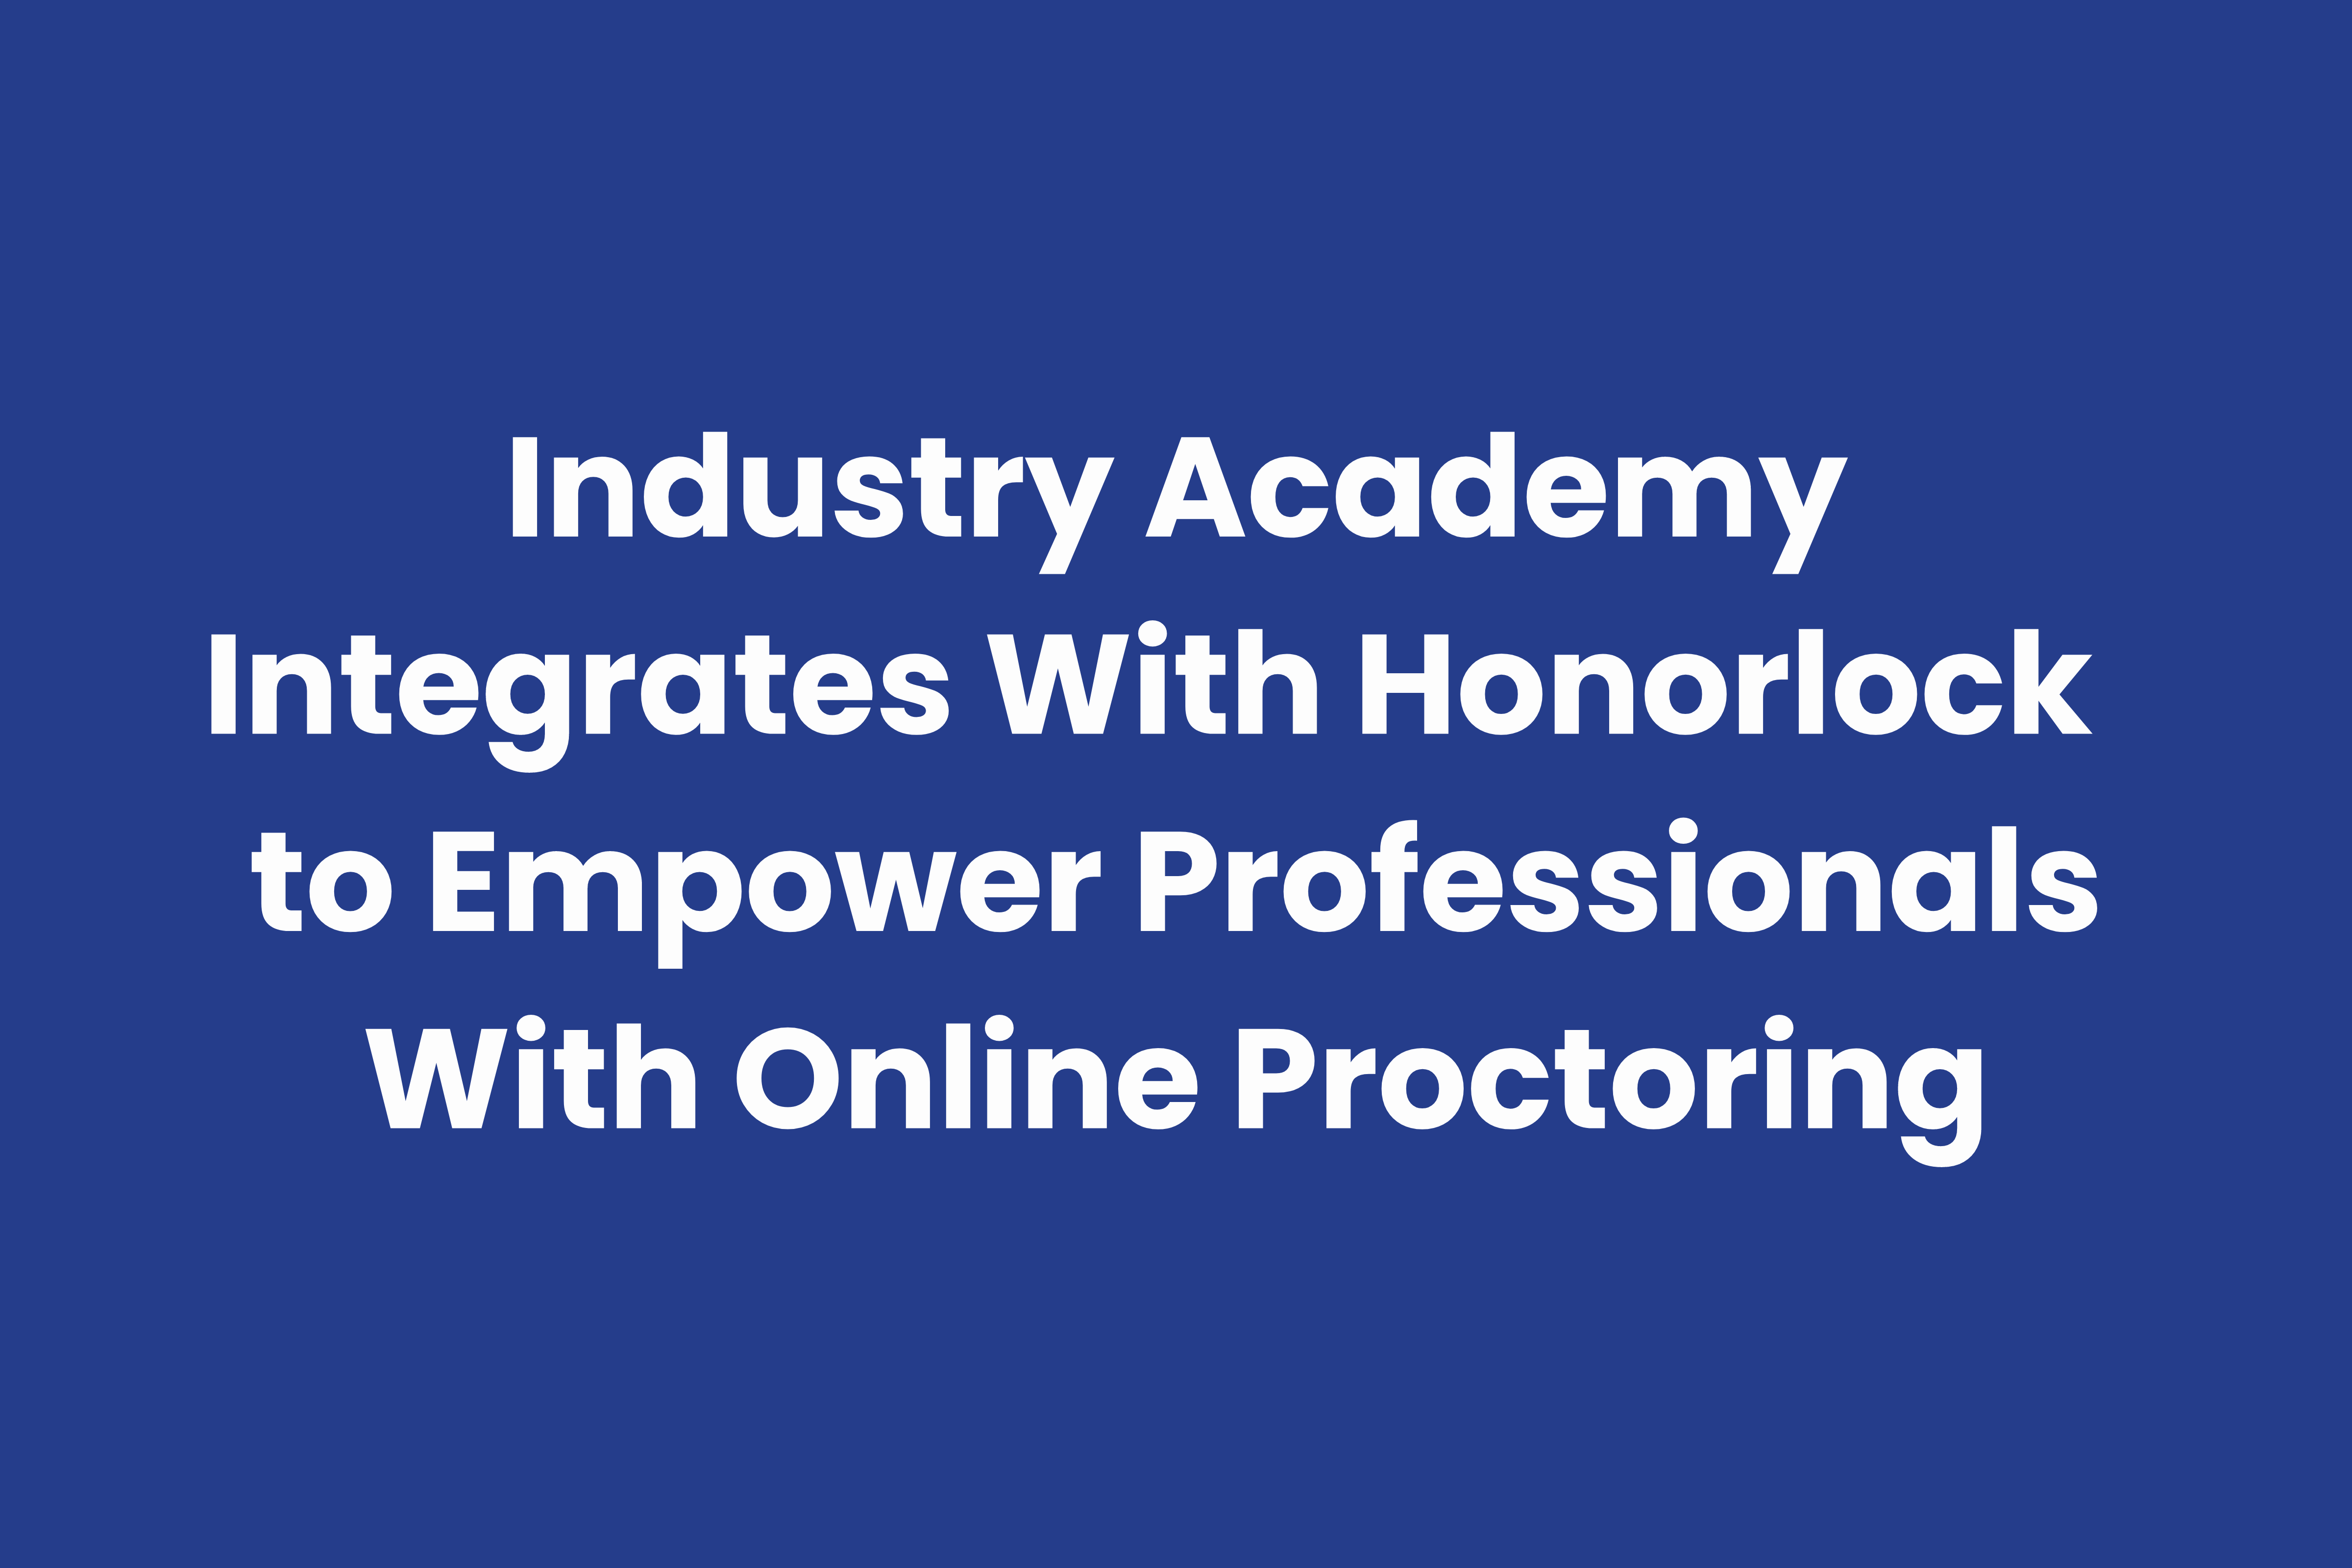 Honorlock online proctoring for corporate and professional education